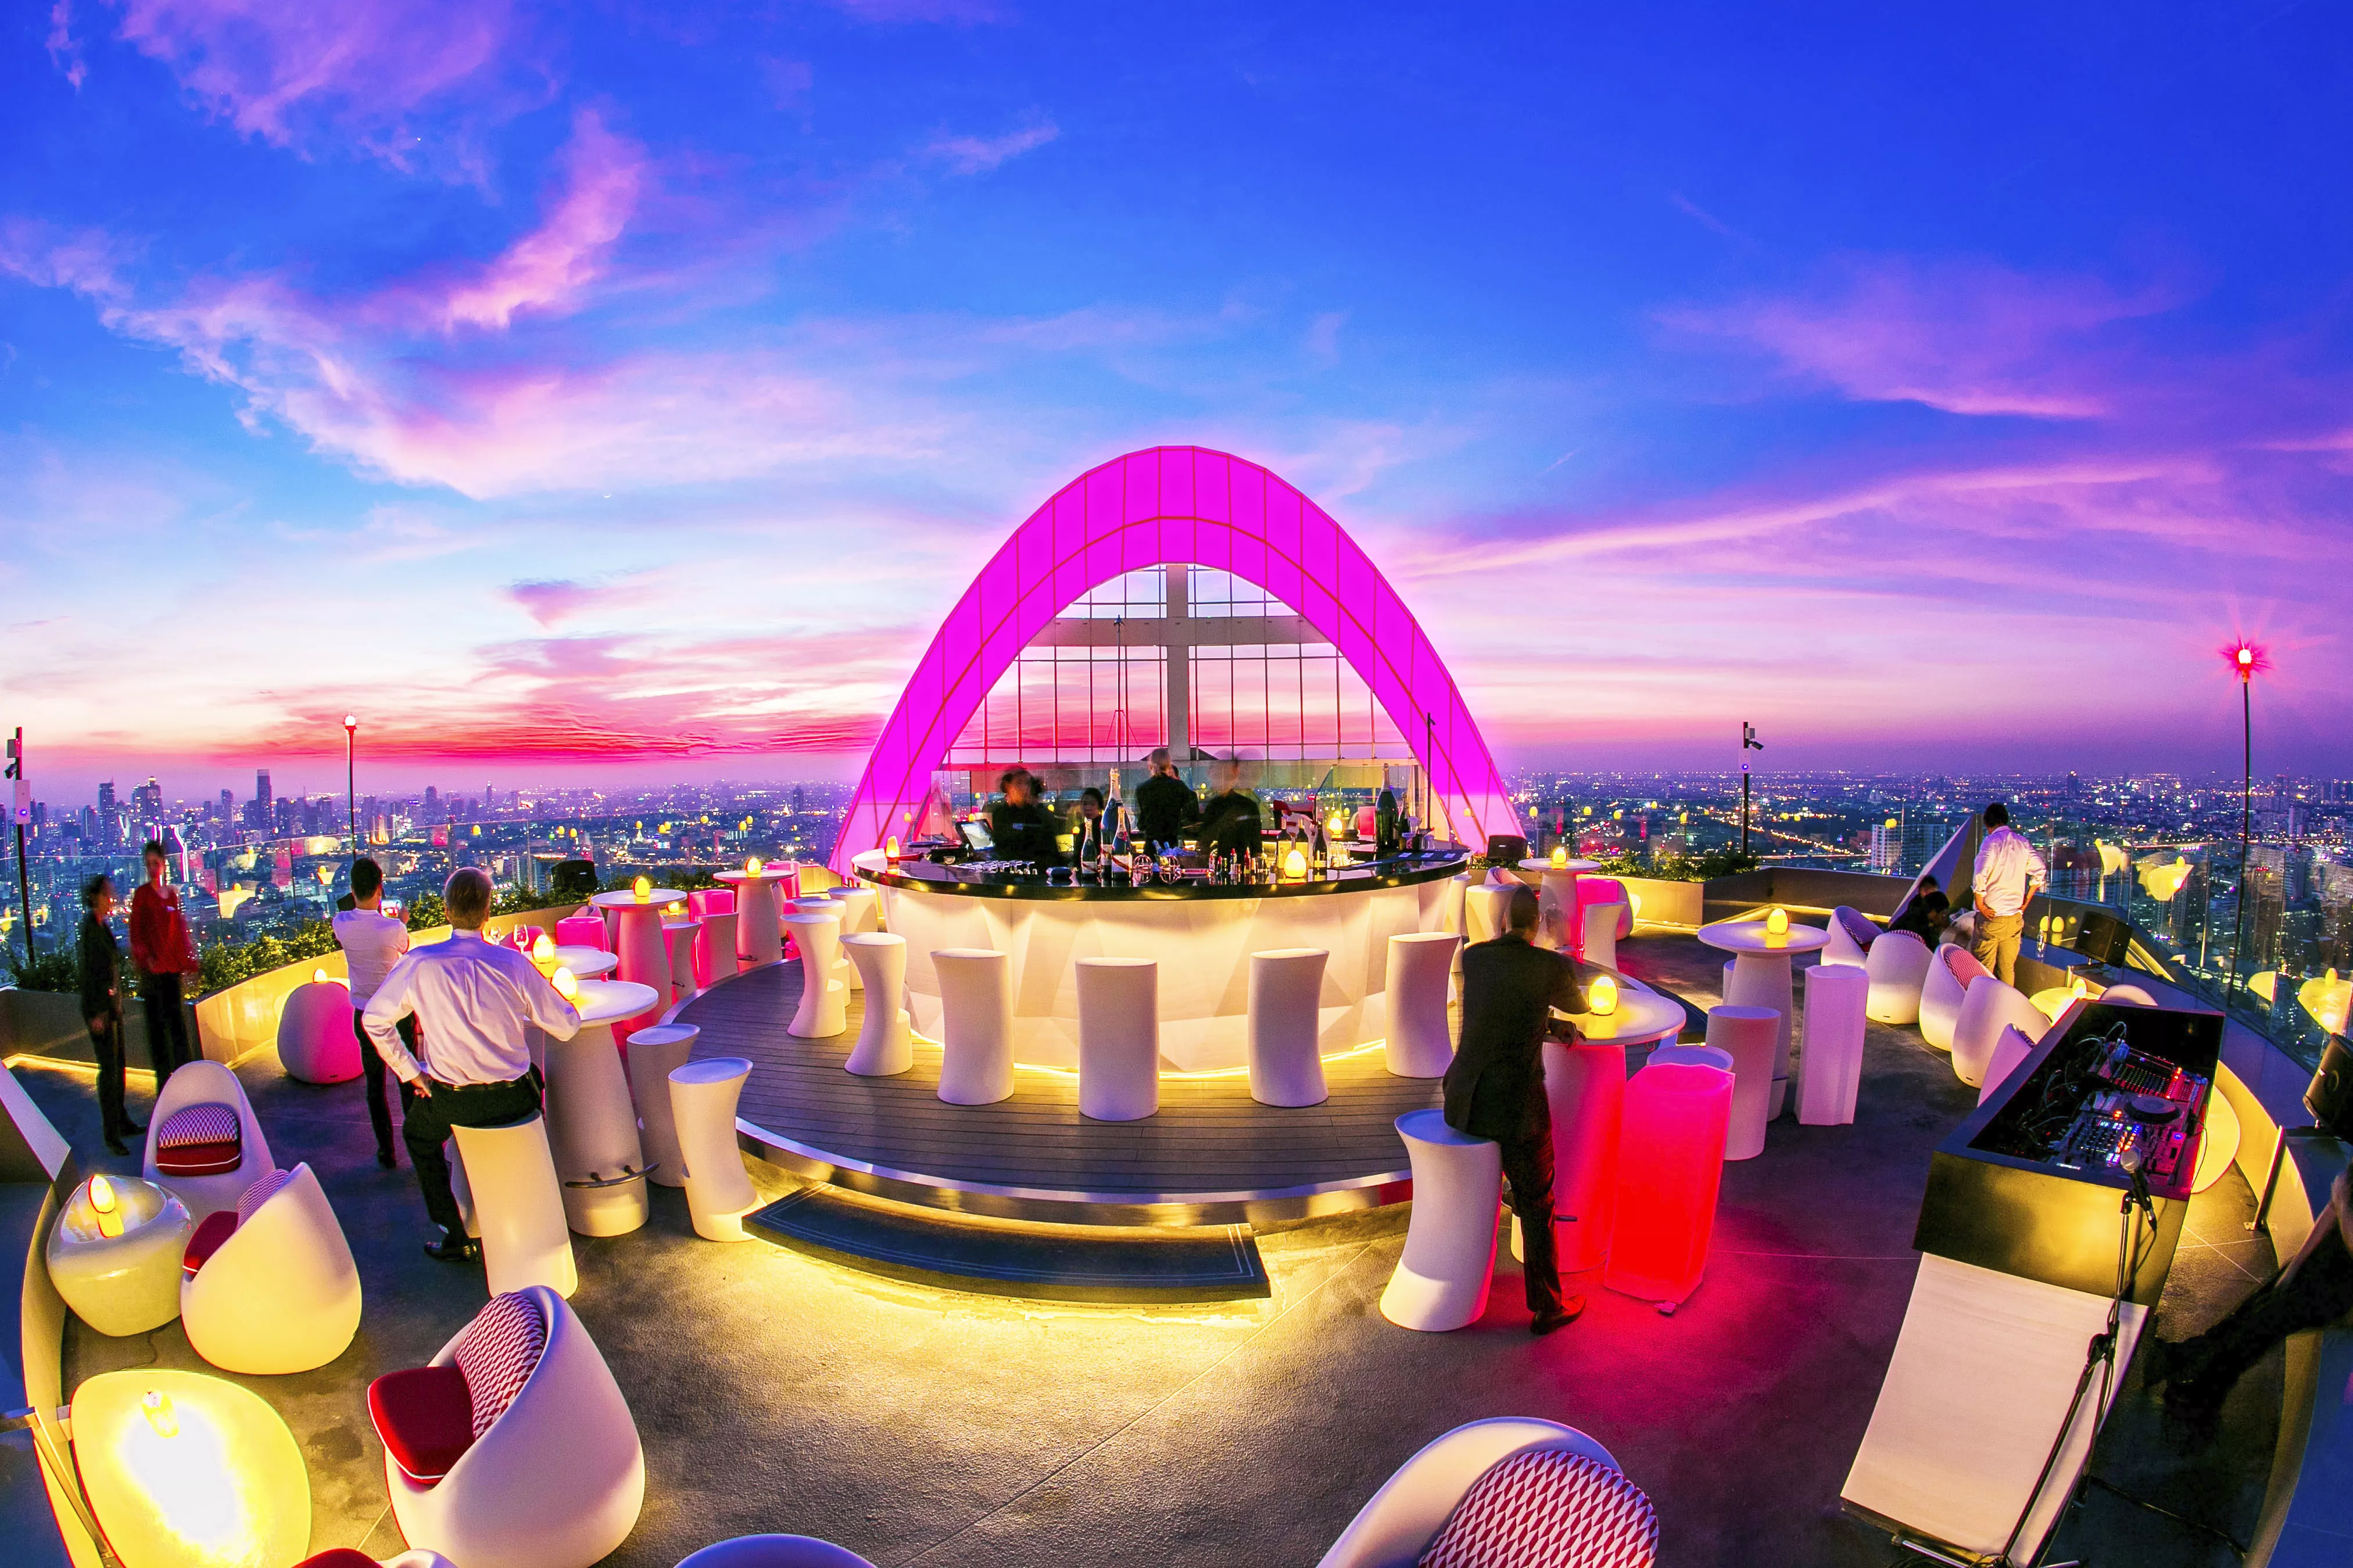 Sky Bar in Thailand, Central Asia | Observation Decks,Bars - Rated 4.5